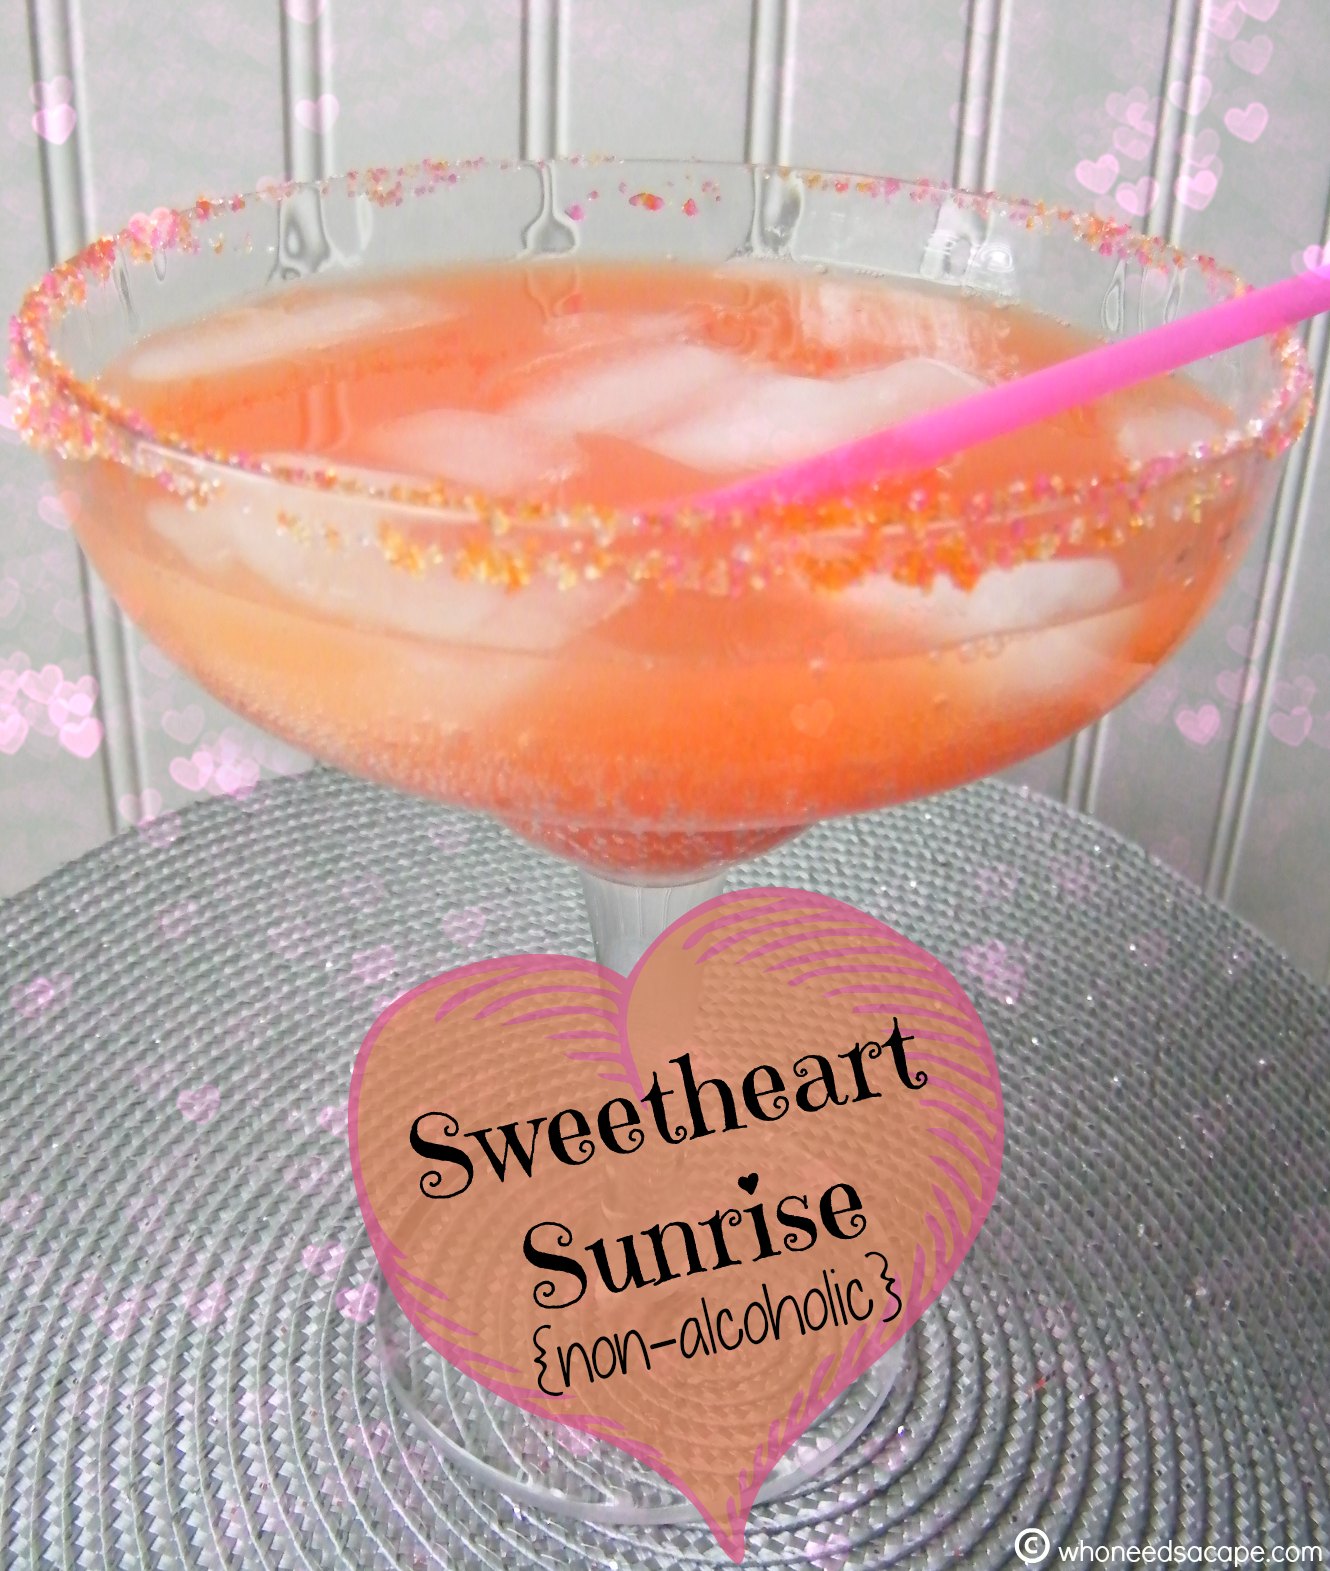 Sweetheart Sunrise {non-alcoholic} Drink - Who Needs A Cape?